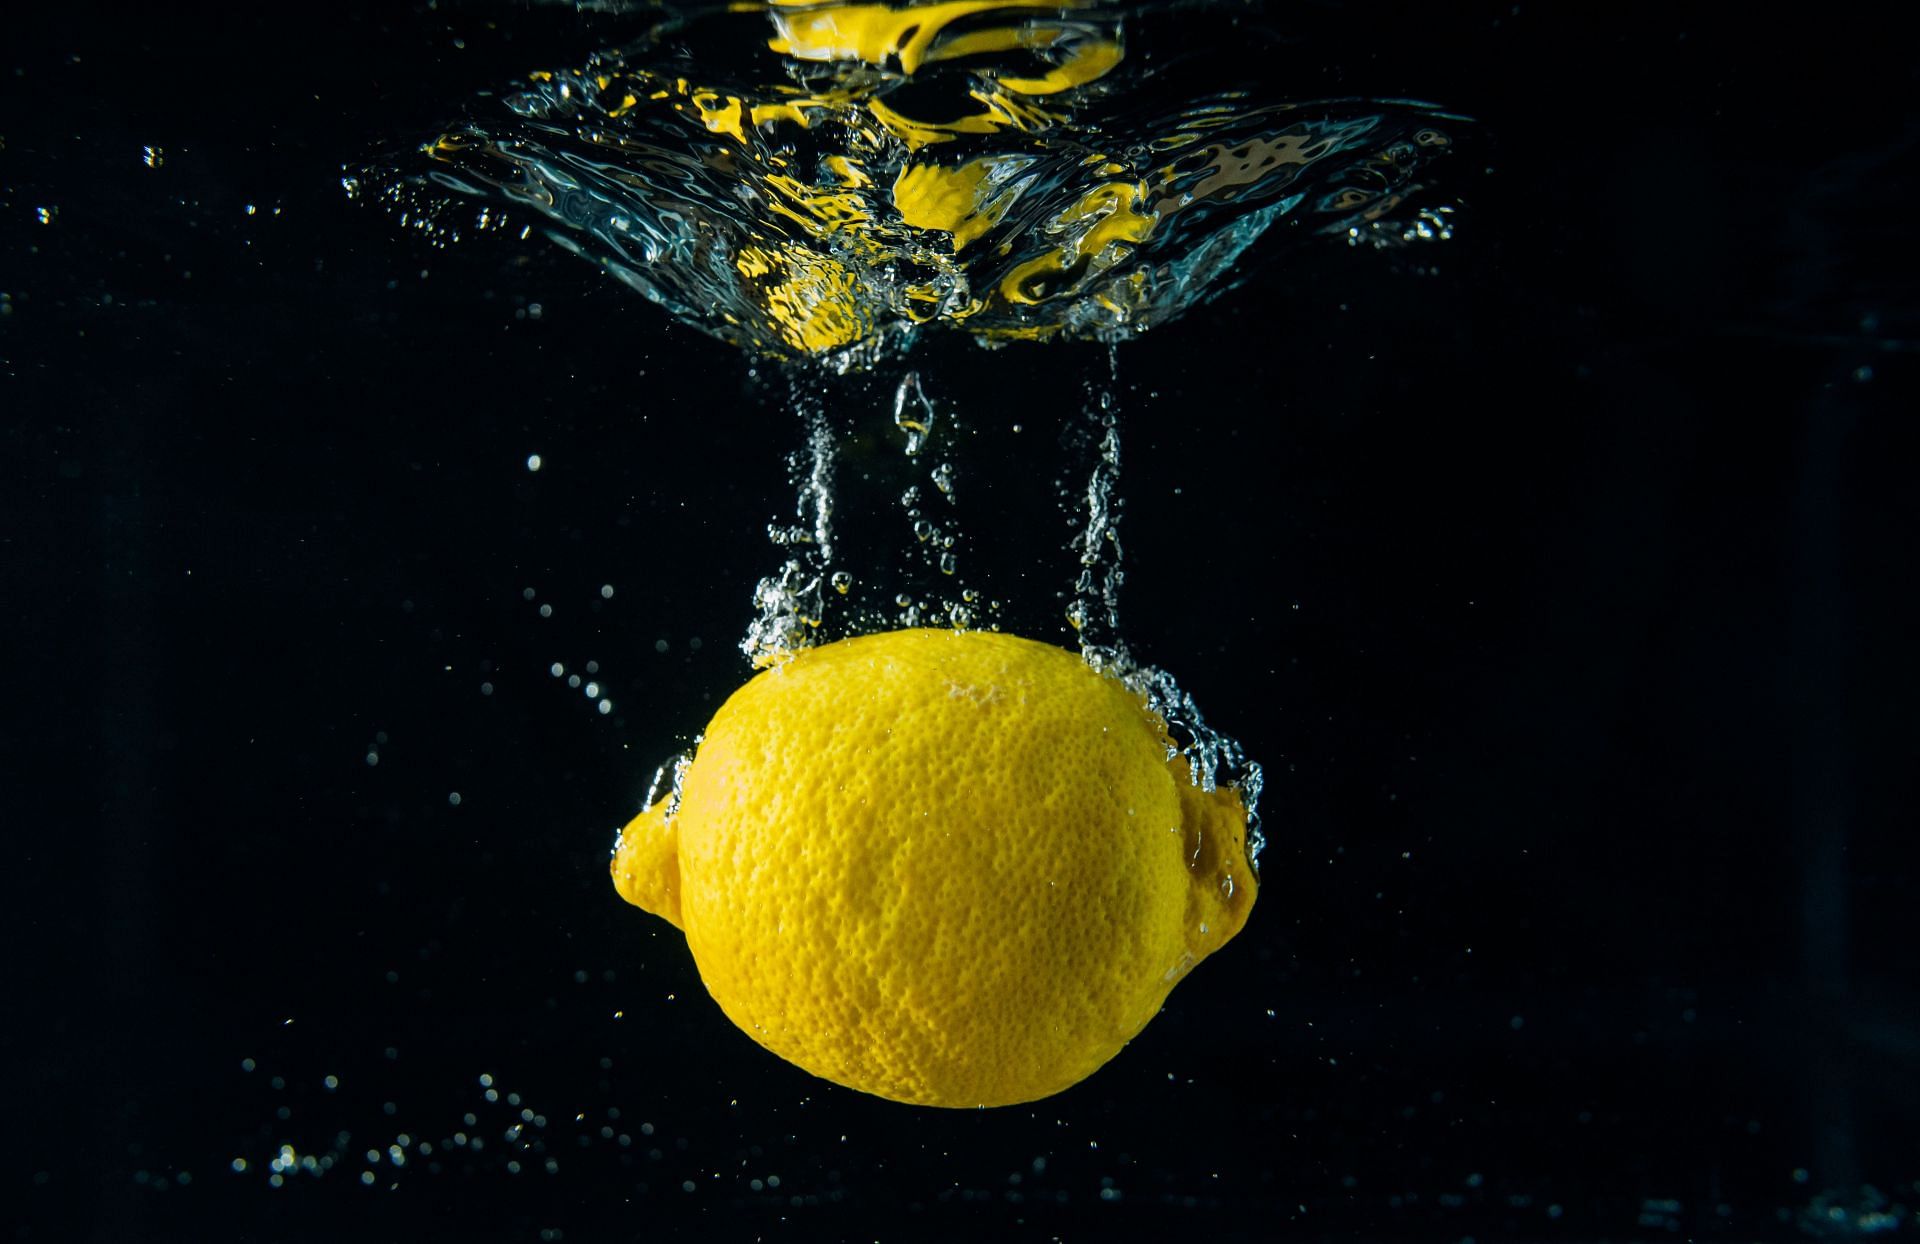 By drinking lemon water, you can avoid intake of unhealthy sugary drinks. (Image via Pexels/Kelly)